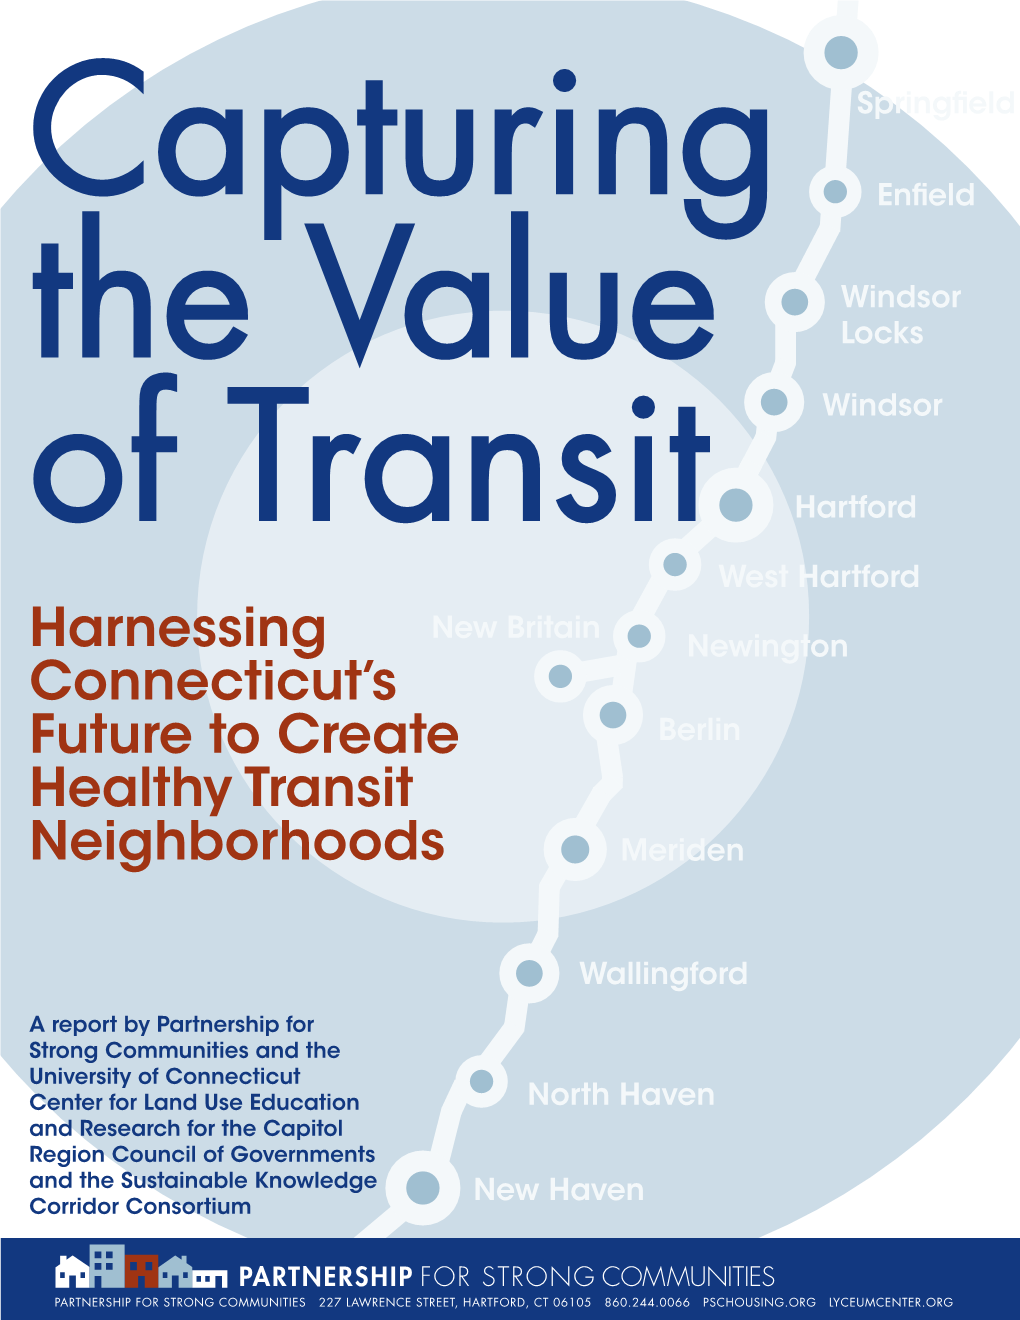 Capturing the Value of Transit: Harnessing Connecticut's Future To